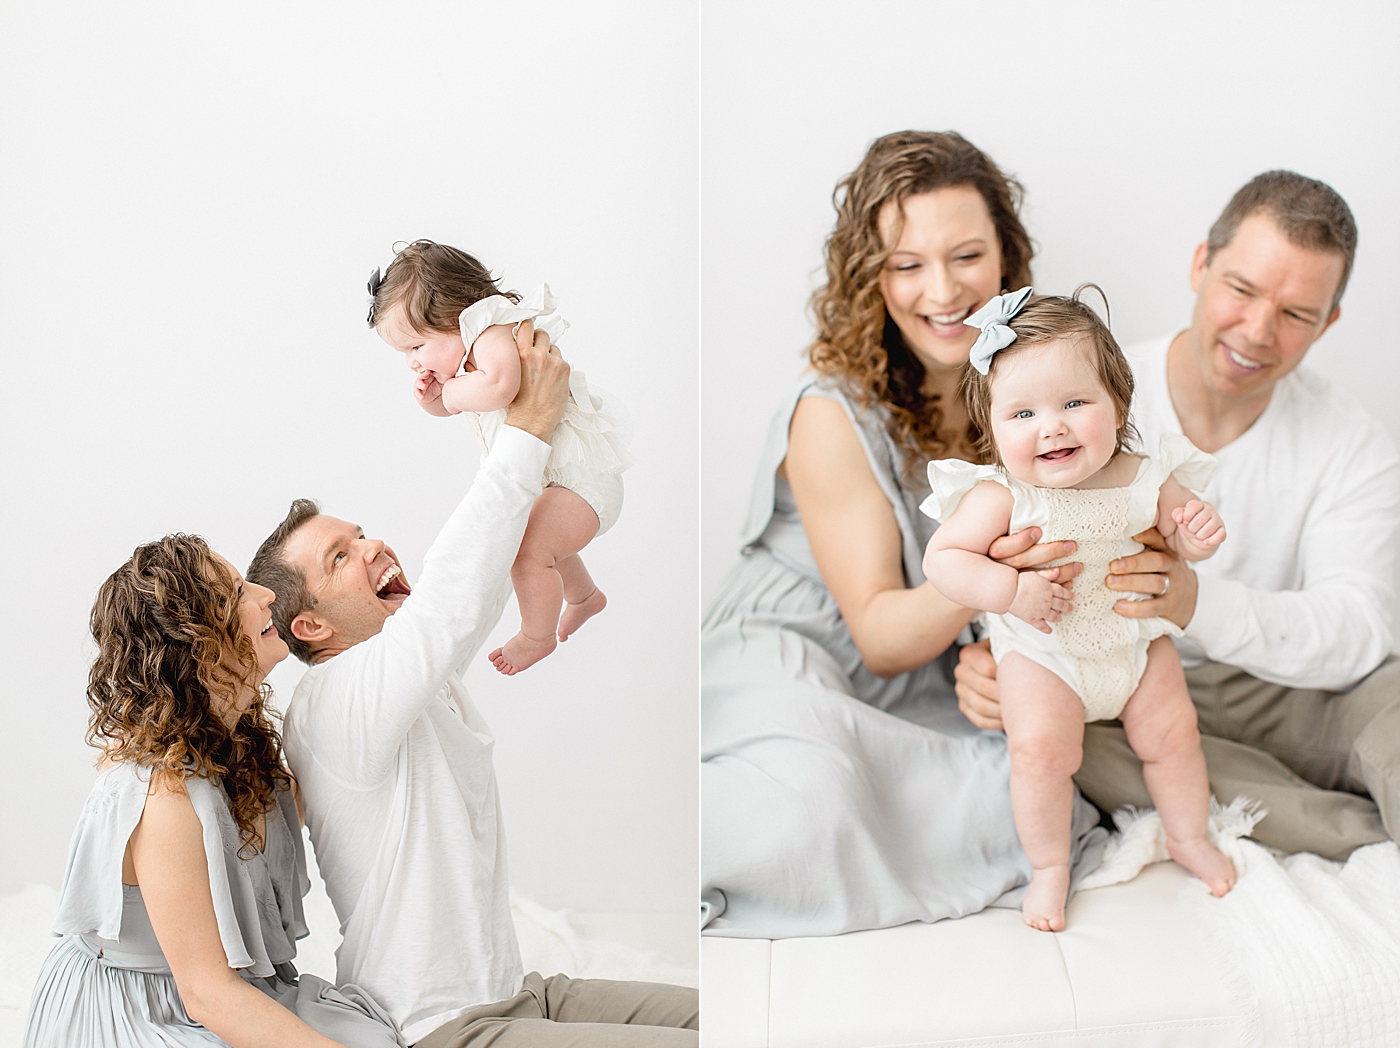 Mom and Dad playing with their daughter during six month milestone photoshoot. Photo by Brittany Elise Photography.